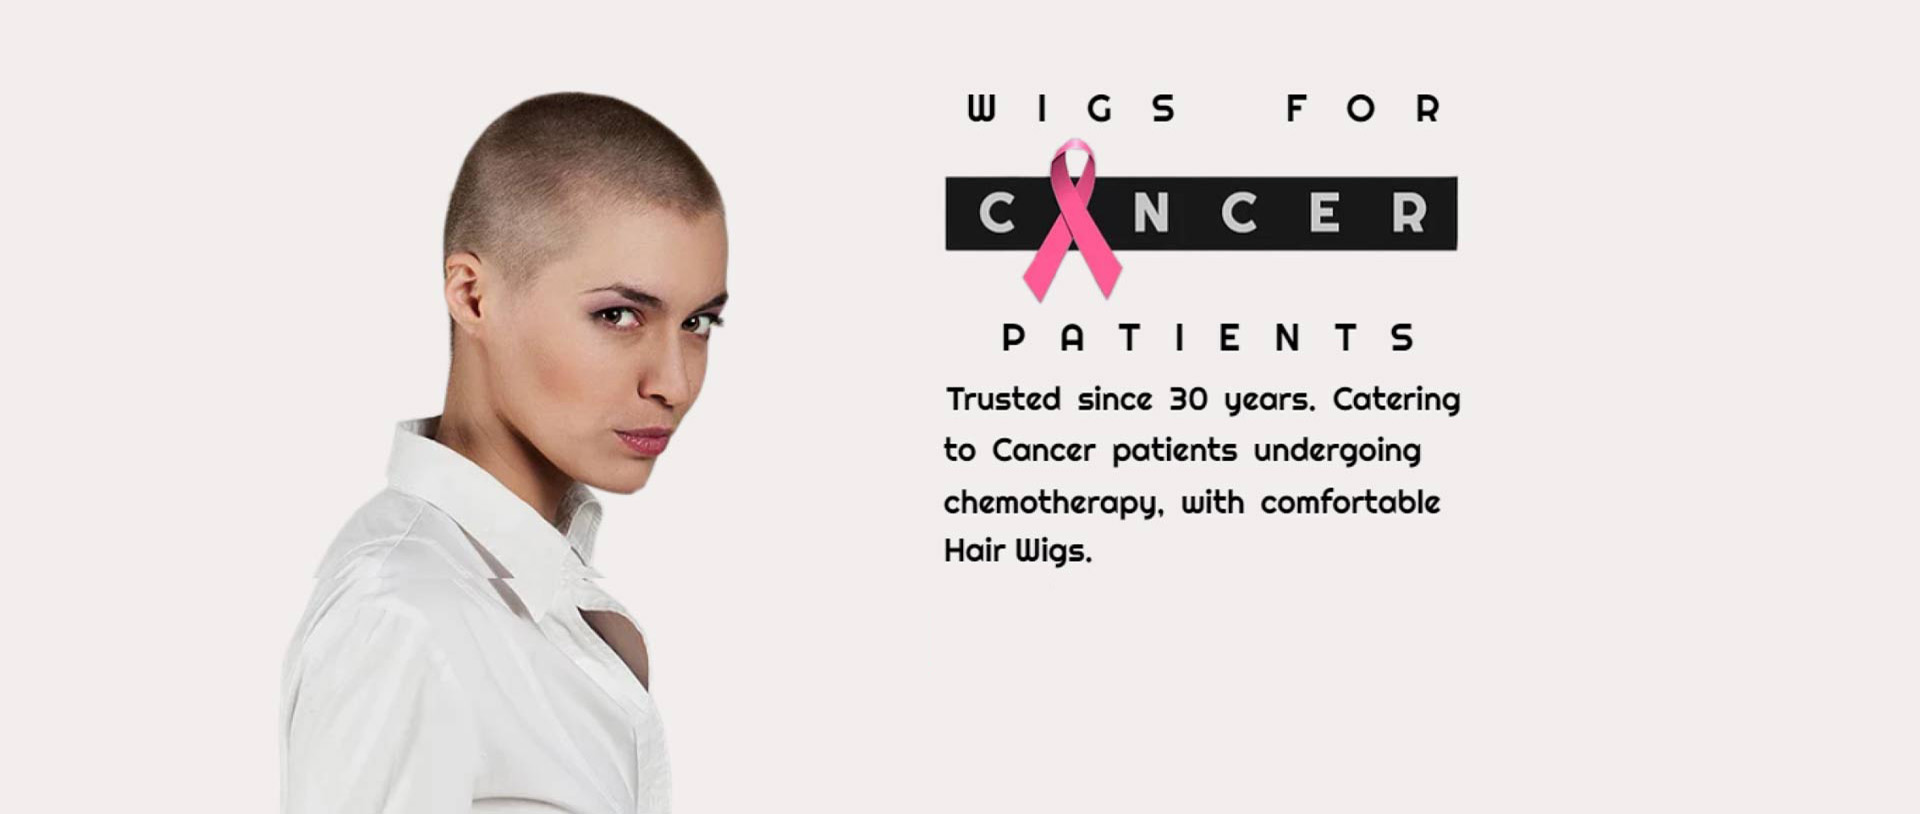 Sheen Wigs & Salon :- wigs for cancer patients, wig shop in delhi, hair  extensions in delhi at our store, comfortable wigs for cancer patients, our wig  store is trusted since decades,